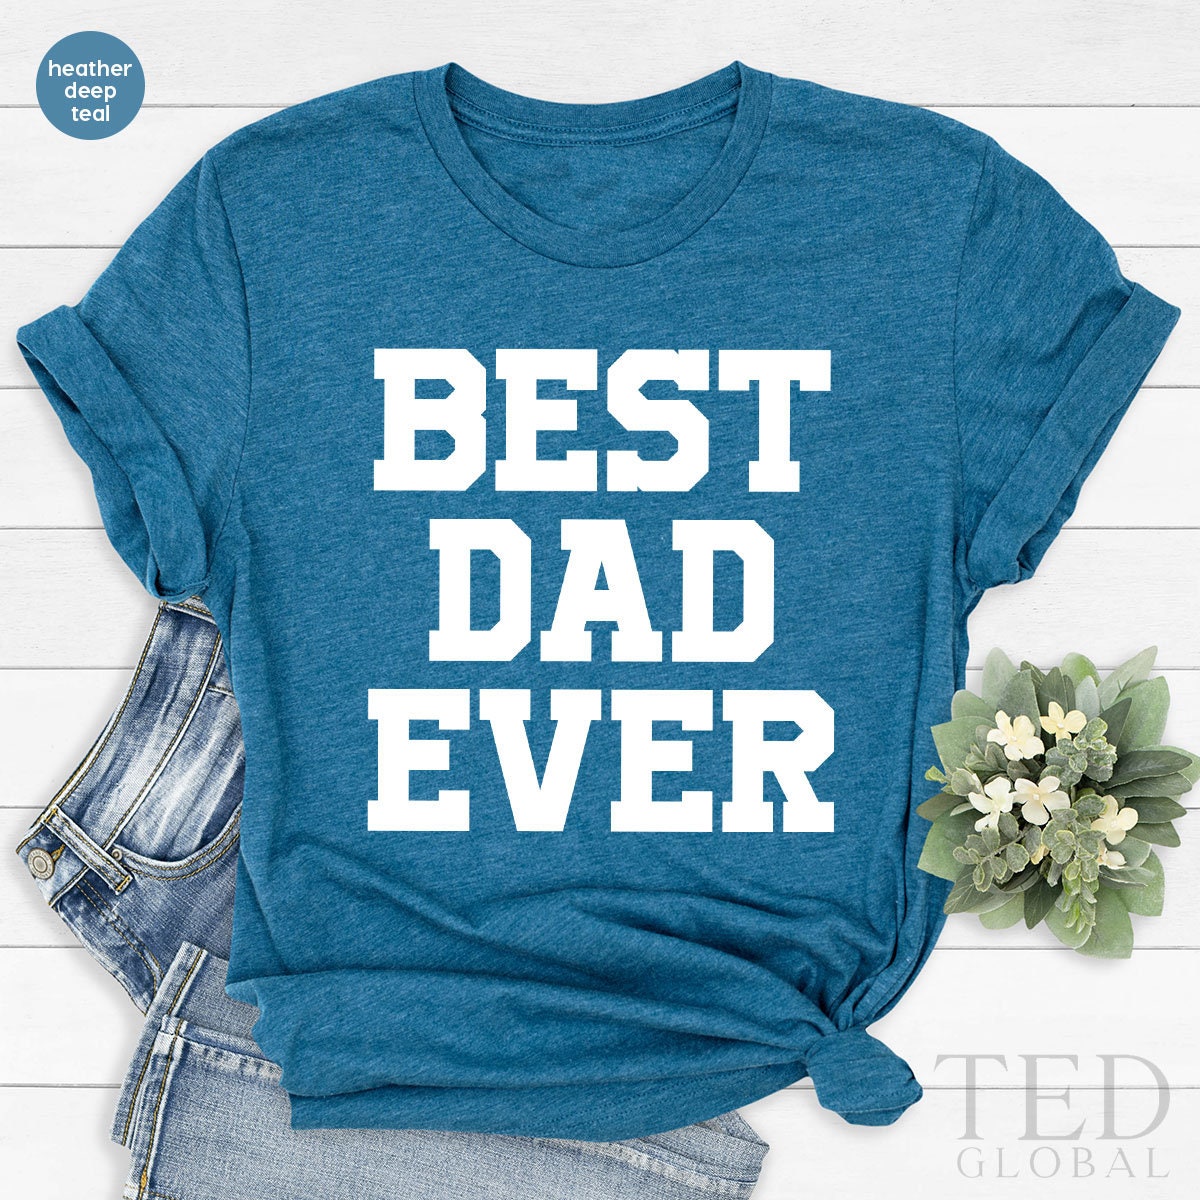 Best Dad Ever Shirt, Fathers Day Shirt, Gifts For Dad, Fathers Day Tee, Dad Birthday Gift, Dad To Be Shirt, New Dad Gift, Best Dad Shirt - Fastdeliverytees.com